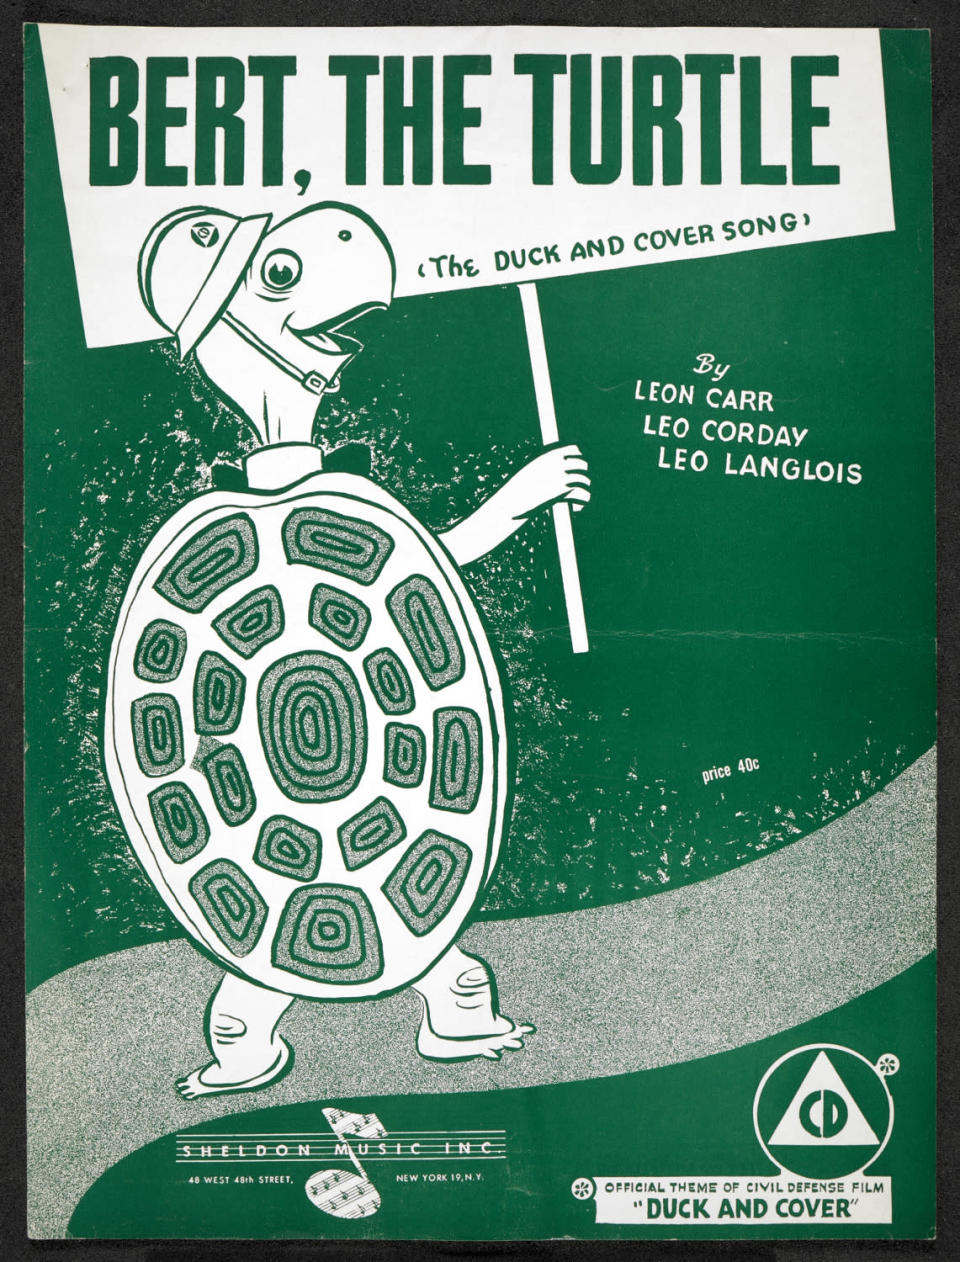 Bert the Turtle's 'Duck and Cover song' told US youngsters how to prepare for a nuclear attack in the 1950s (British Library)